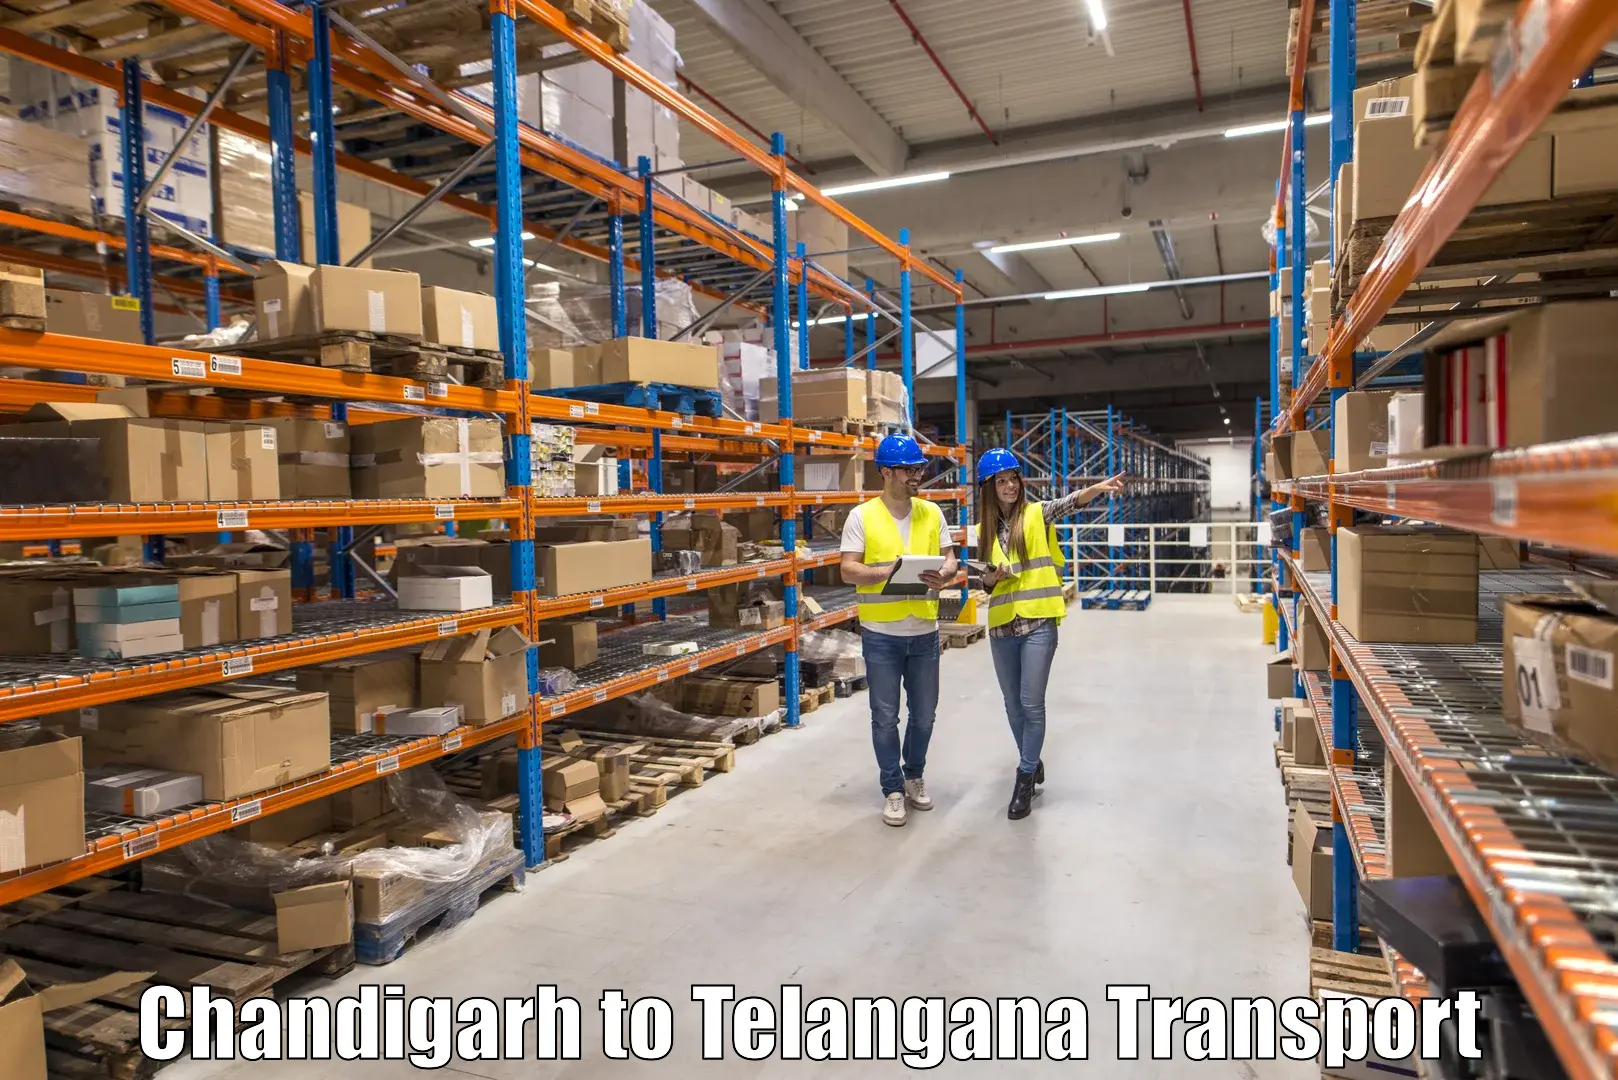 Part load transport service in India Chandigarh to Gollapalli